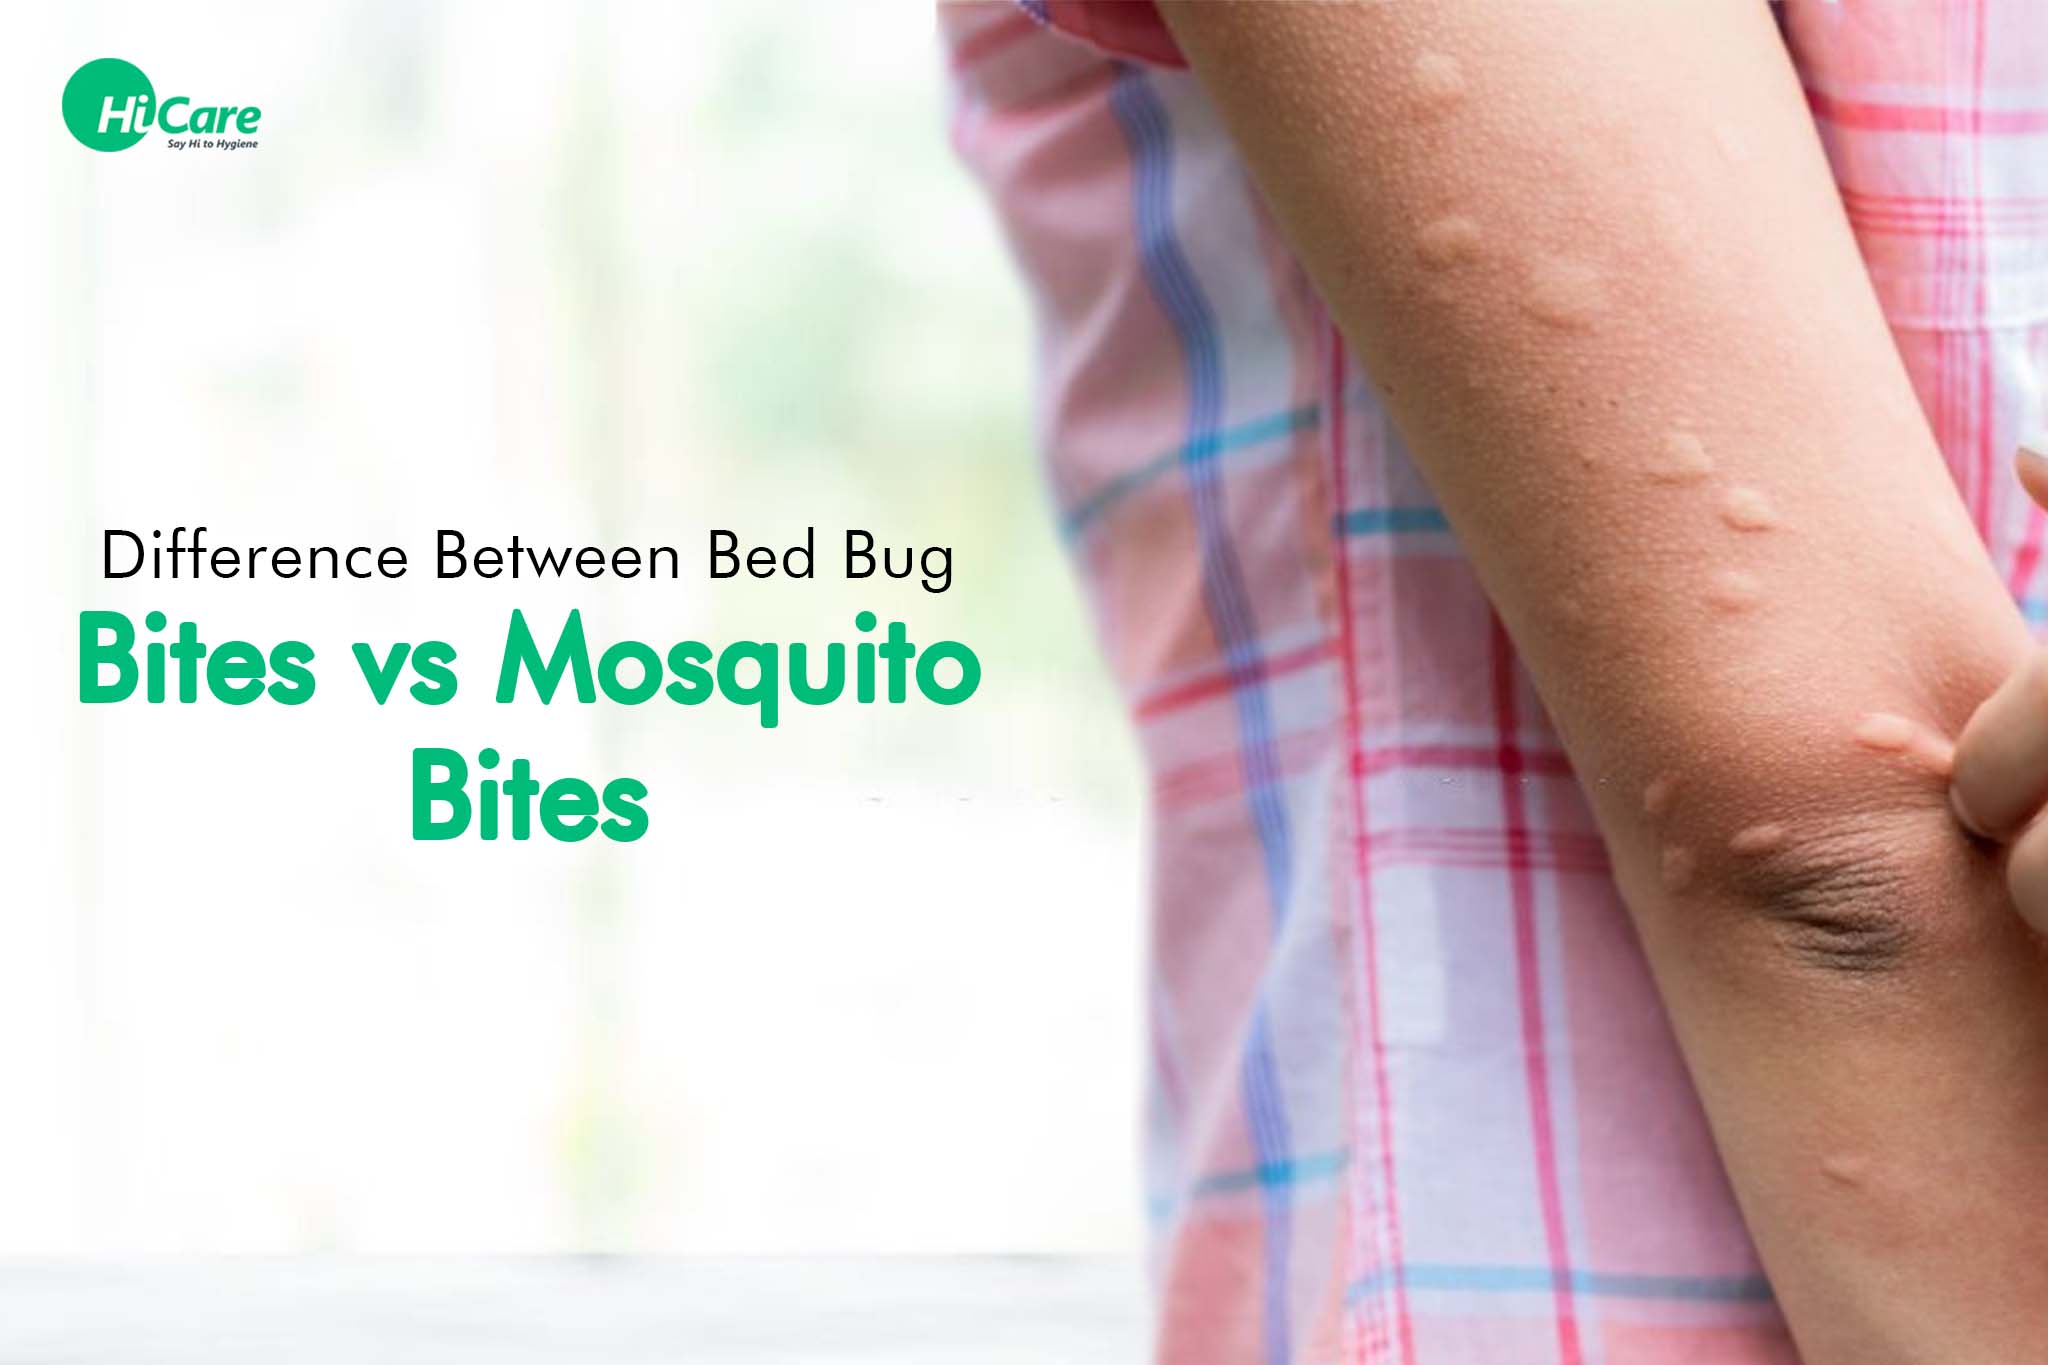 Difference Between Bed Bug Bites vs Mosquito Bites